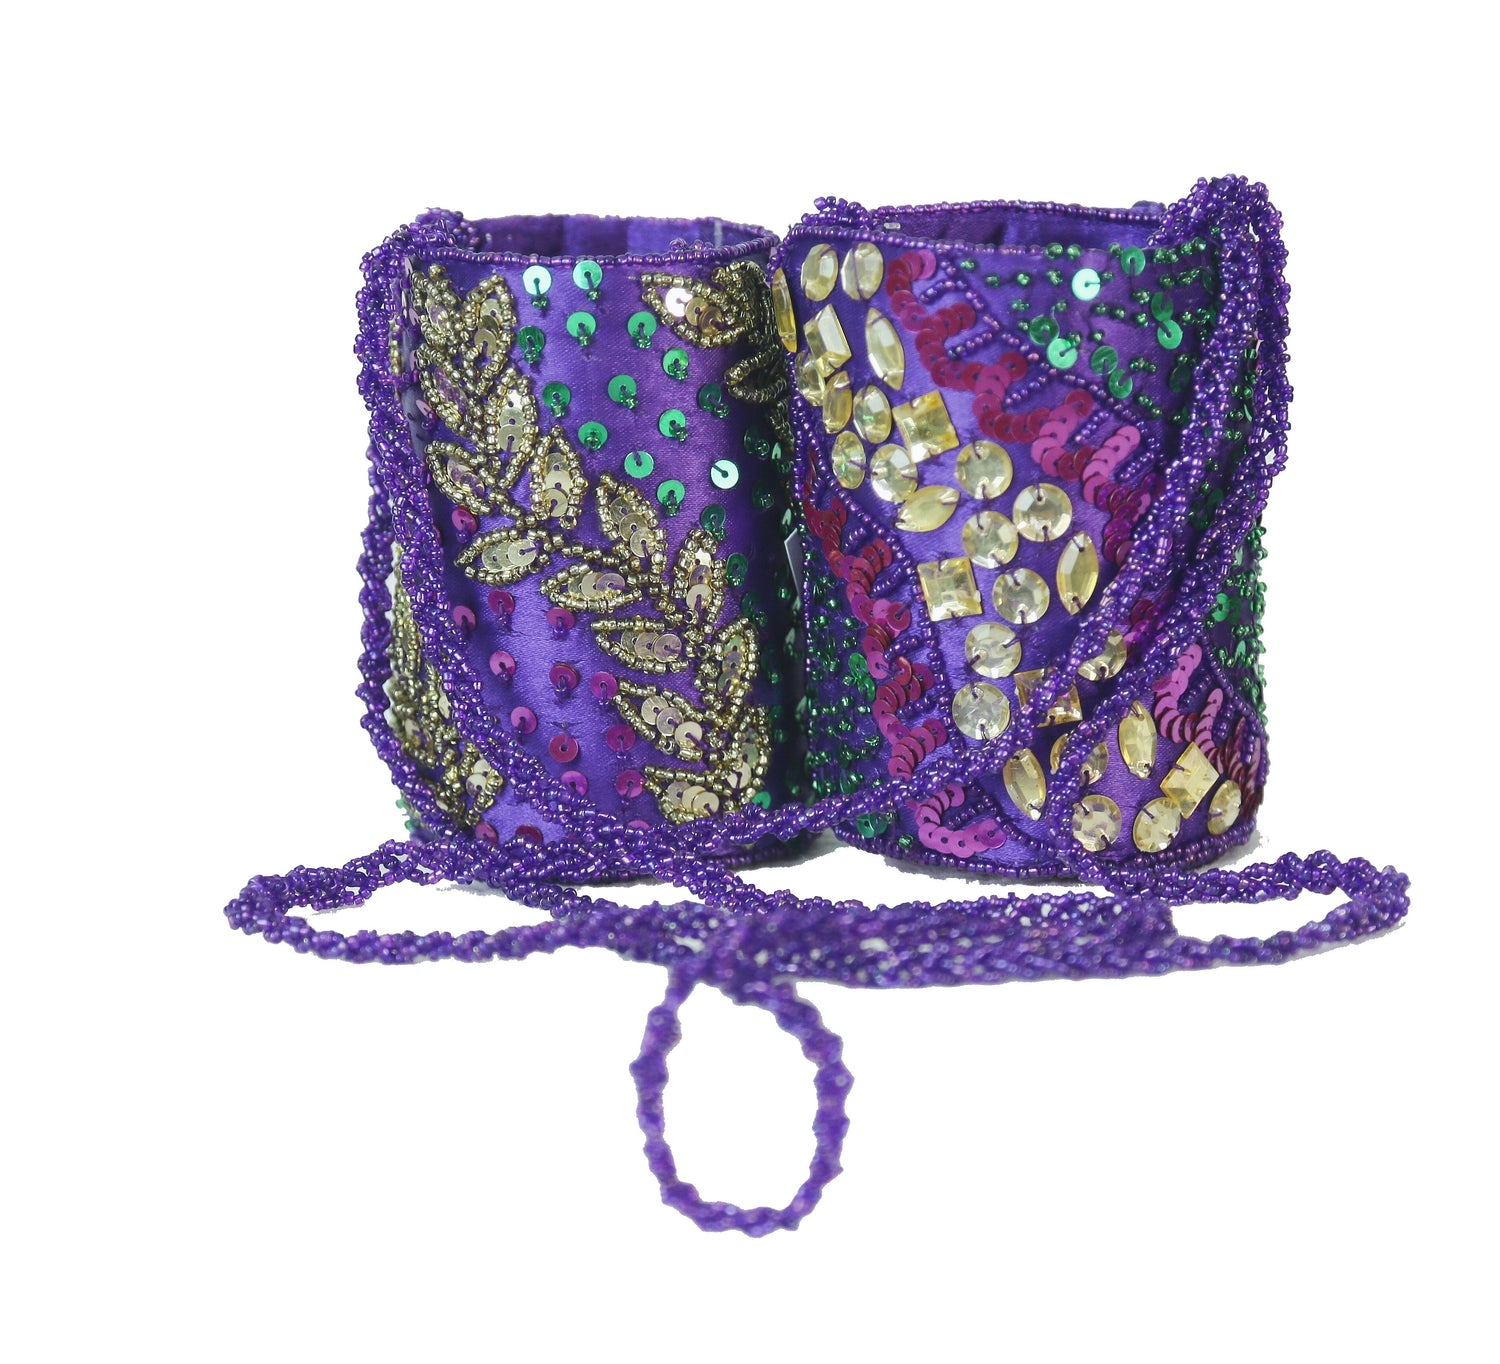 Mardi Gras Coozies & Drink Holders - Glass Beaded & Sequined Coozie Can Holder